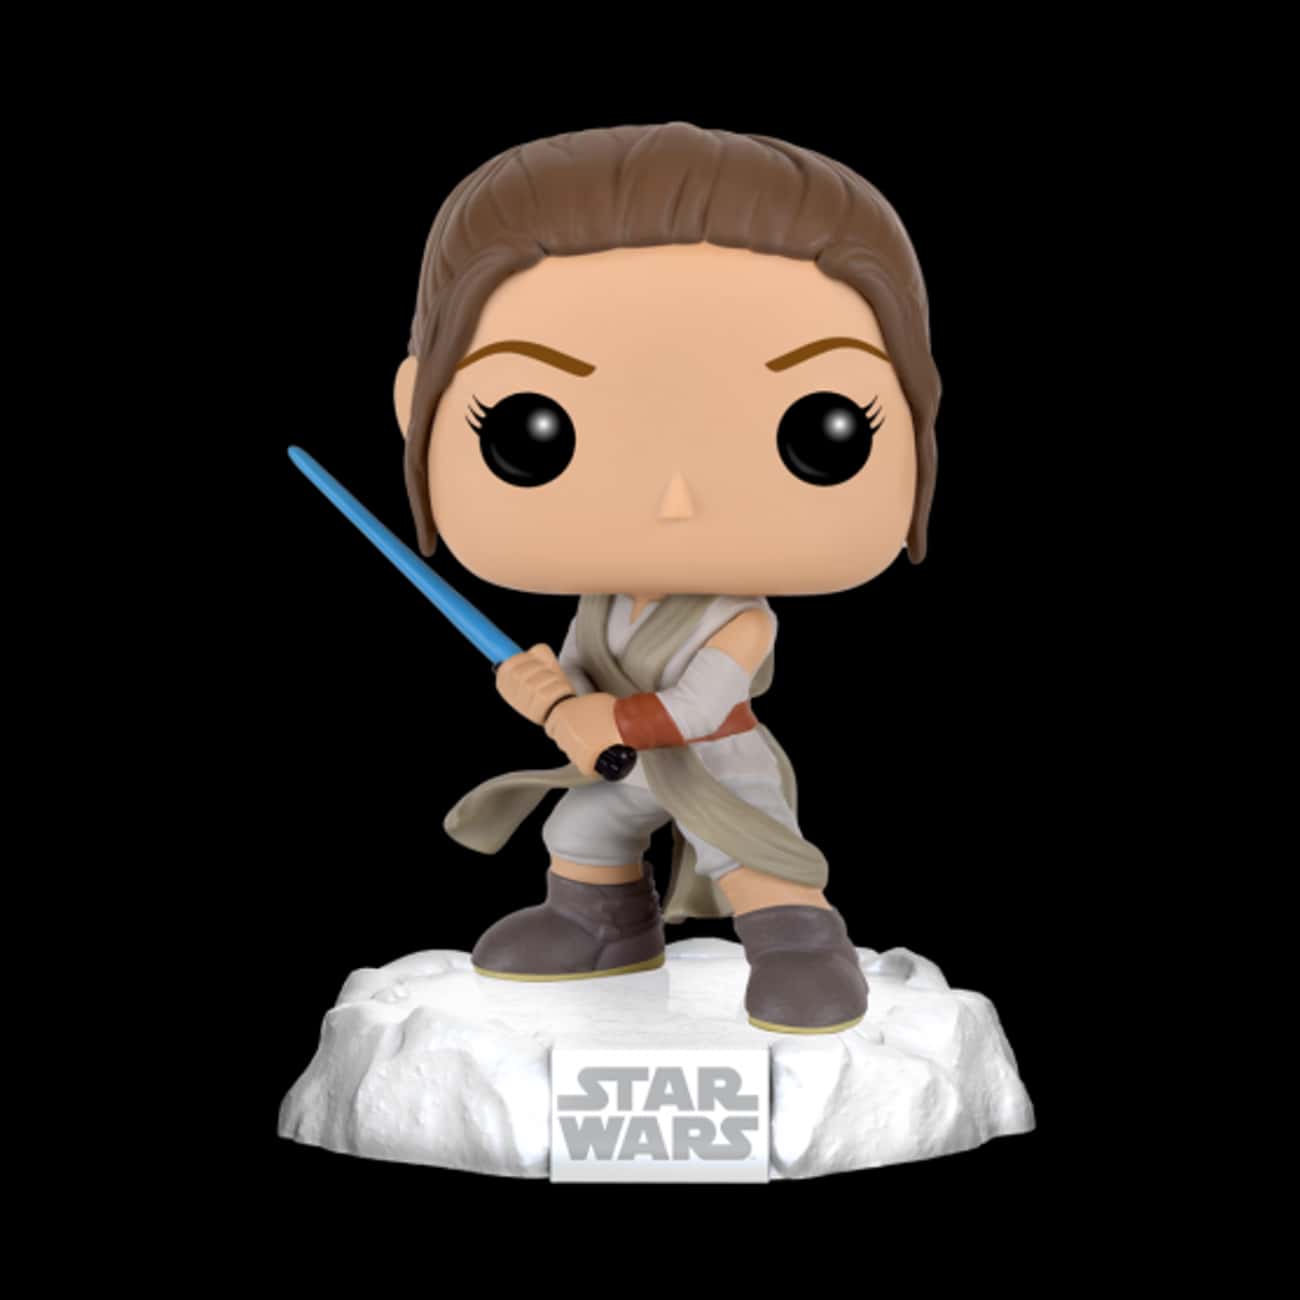 Pop Star Wars: The Force Awakens - Rey with Lightsaber